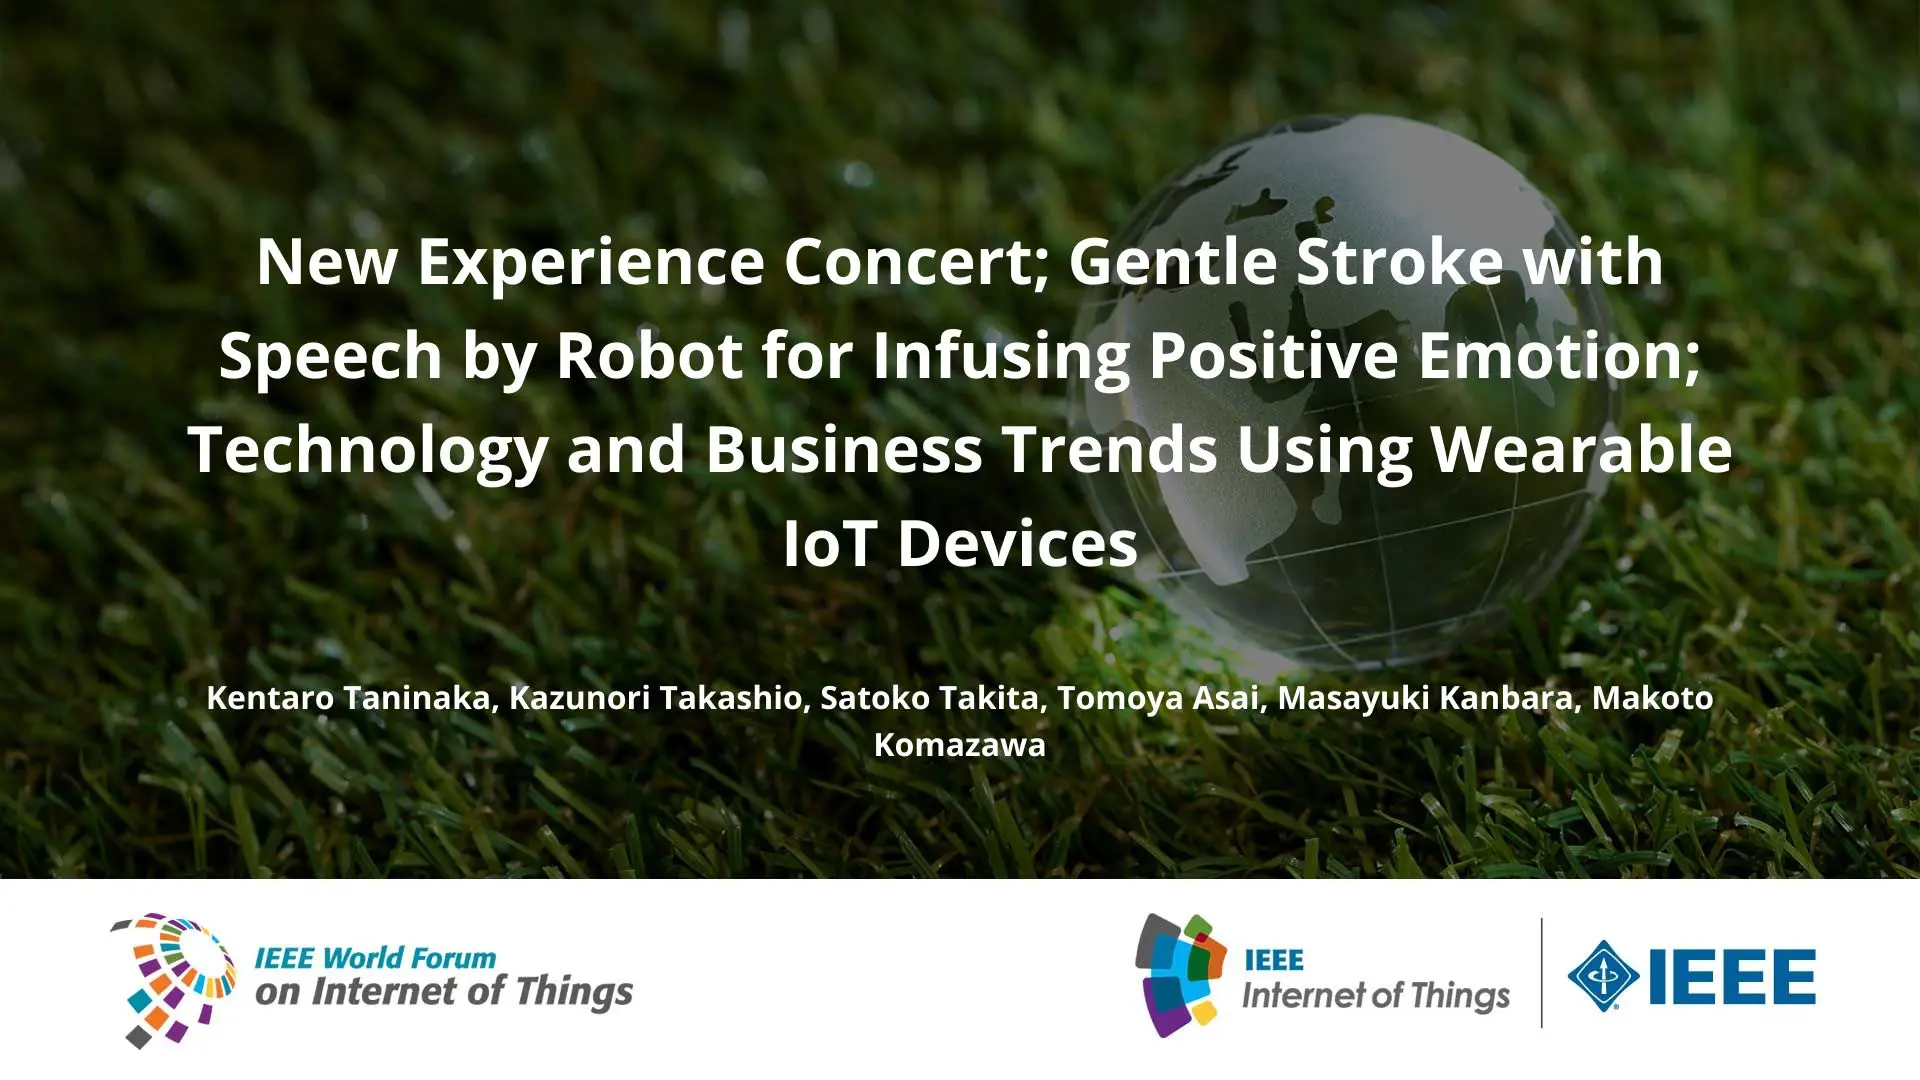 New Experience Concert; Gentle Stroke with Speech by Robot for Infusing Positive Emotion; Technology and Business Trends Using Wearable IoT Devices